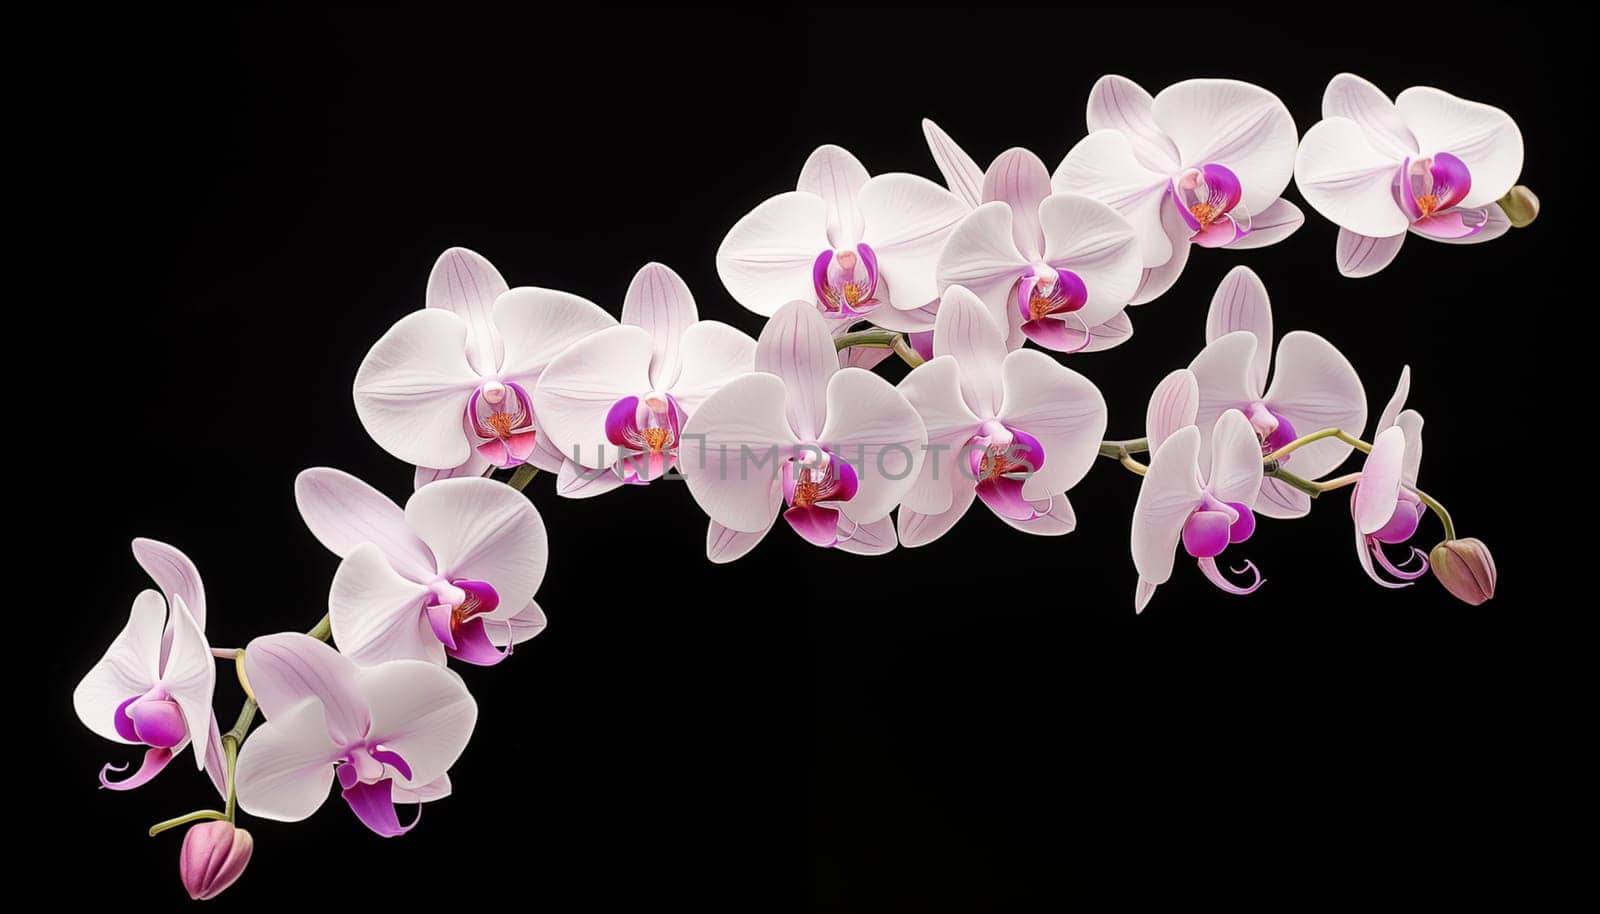 Orchid plant in full bloom. High quality photo